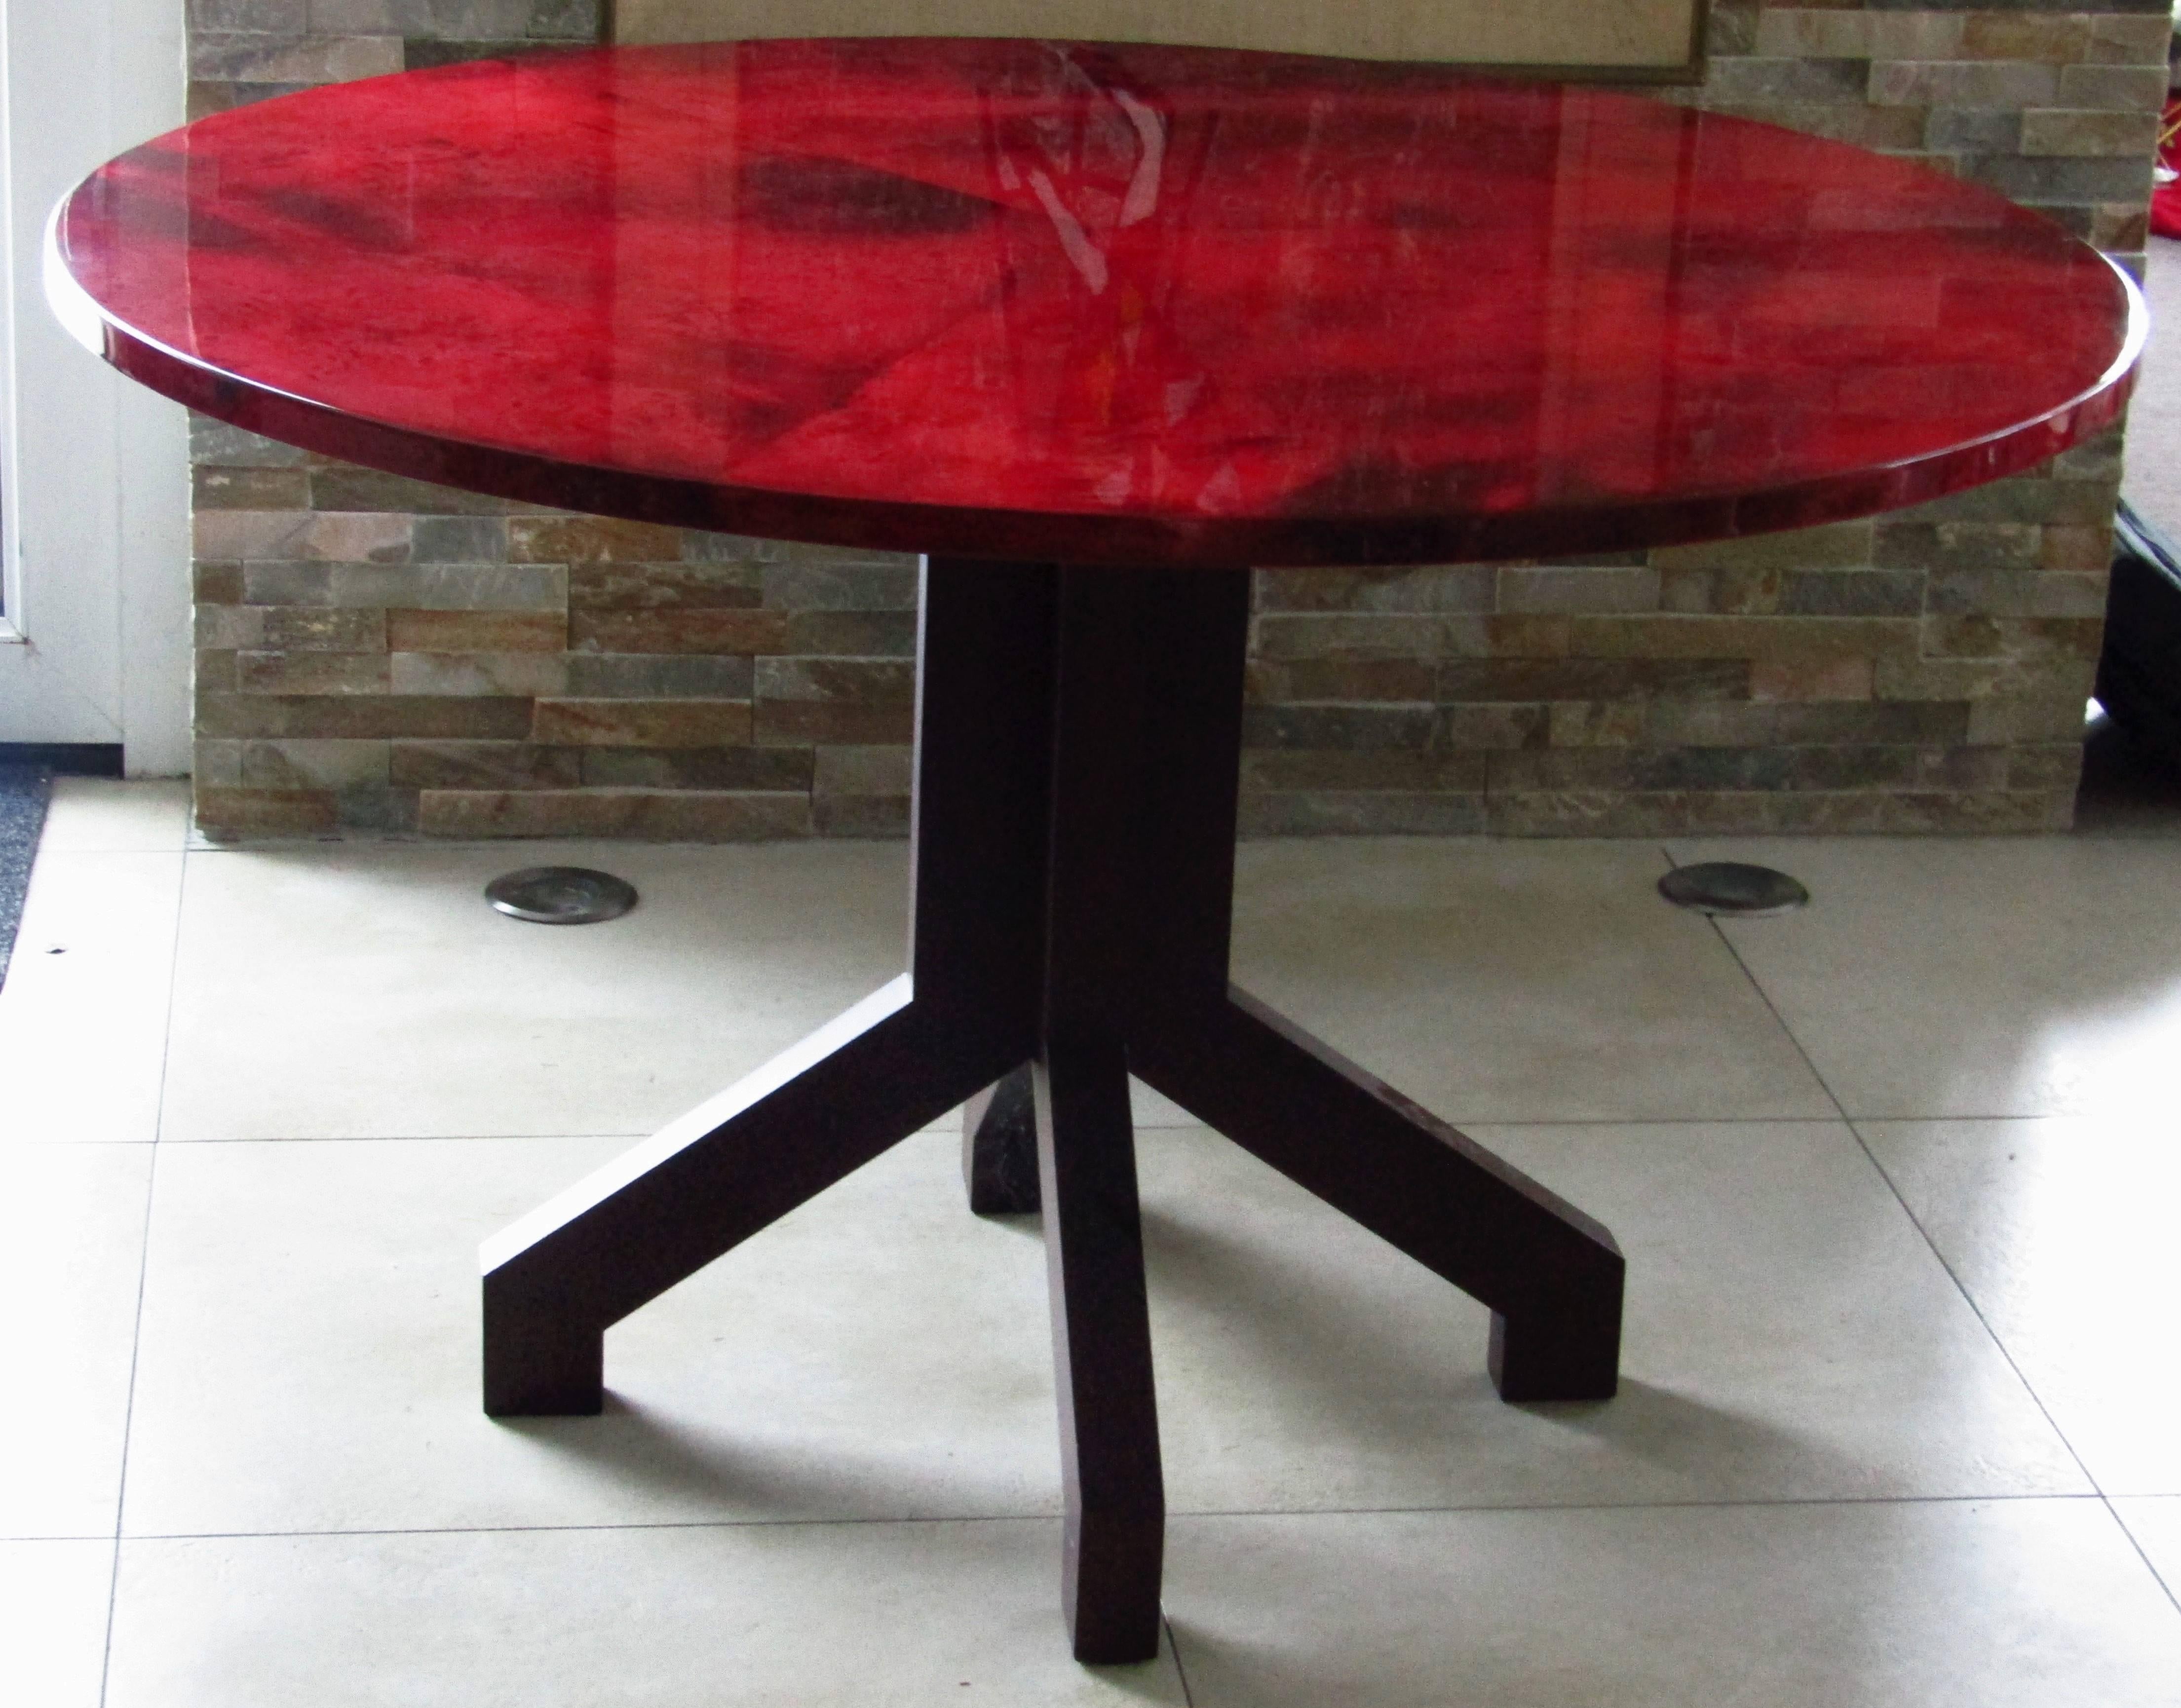 Aldo Tura dining centre table, Italy, 1958. Goatskin with high gloss lacquer. Rosewood legs. Very good vintage condition. Was used as shop interior. Rare red color.

Four matching chairs available, see picture.

*** we offer door to door shipping.